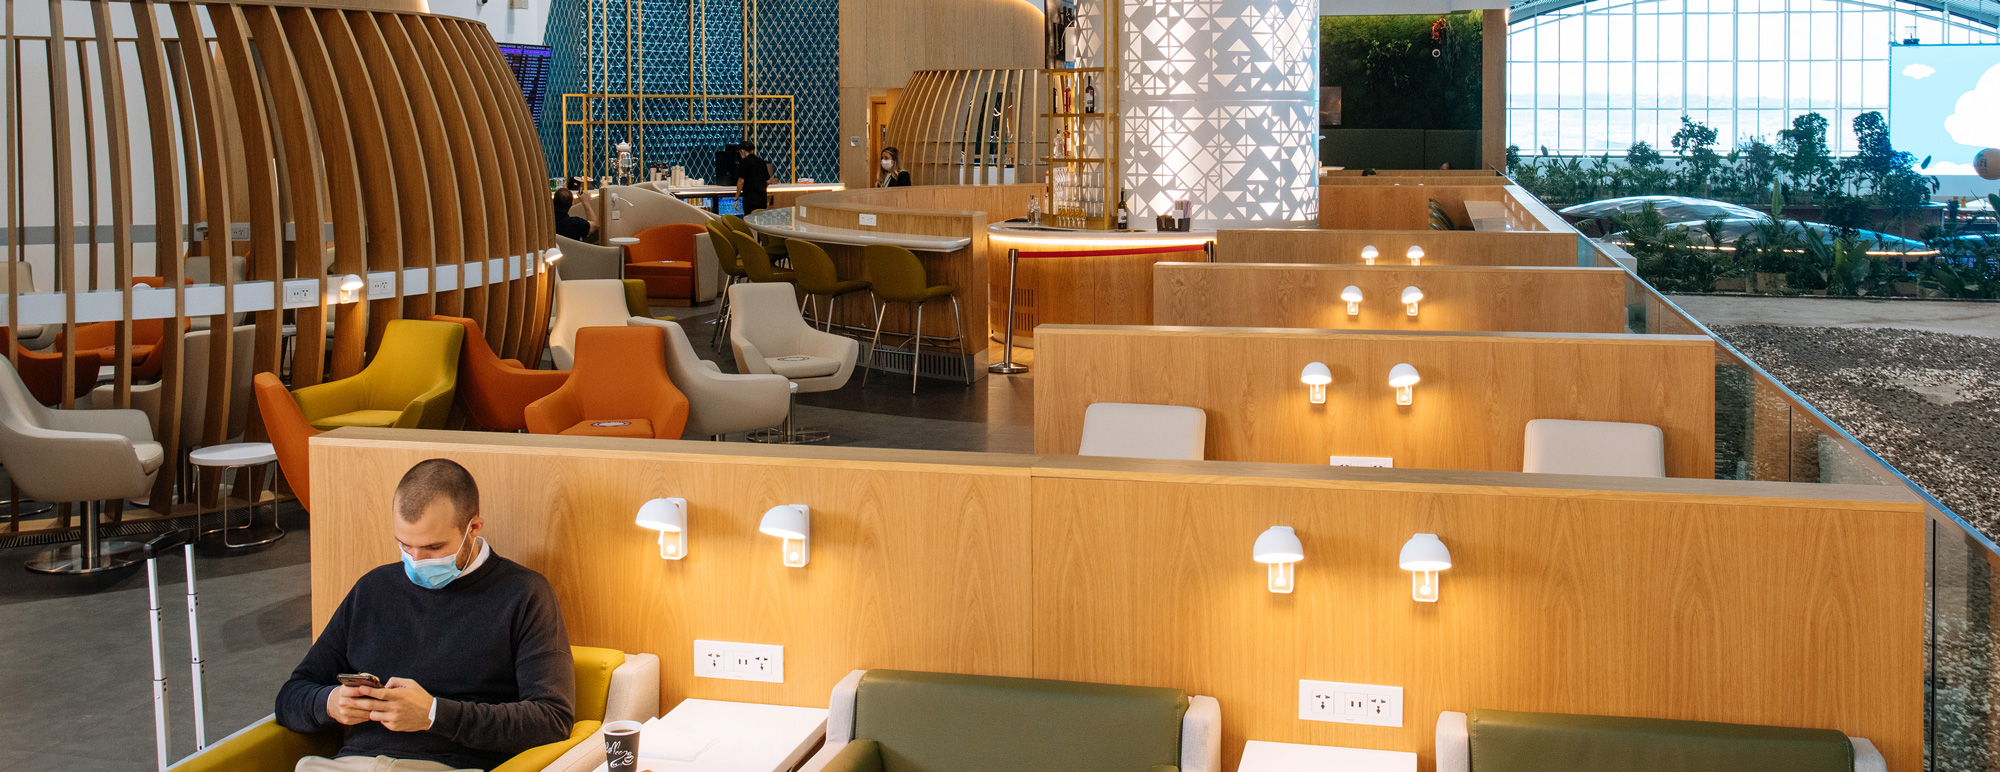 SkyTeam Lounges Have Safety in Mind 24/7